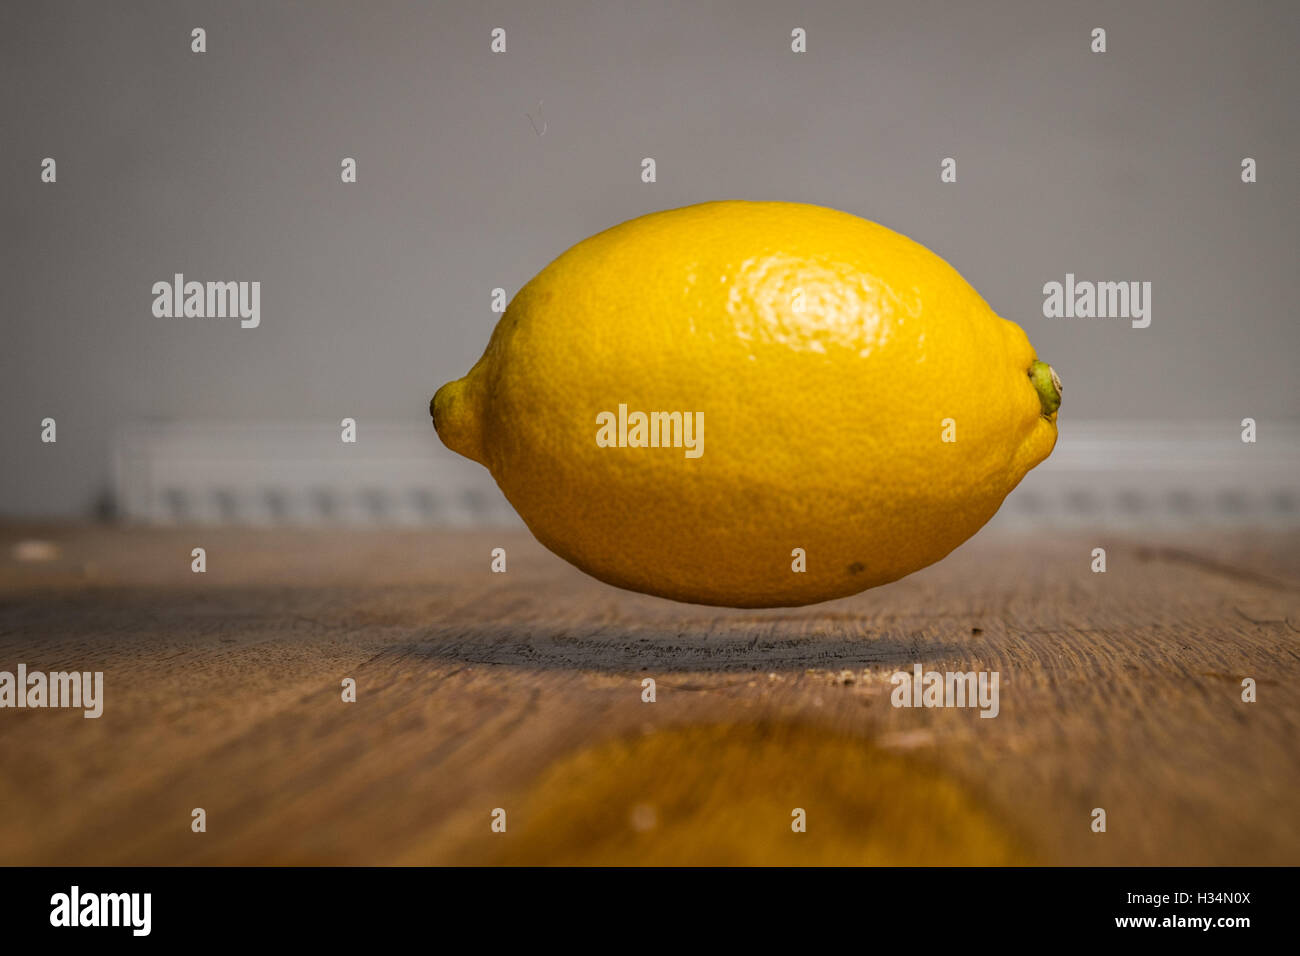 A lemon floating just above a table Stock Photo